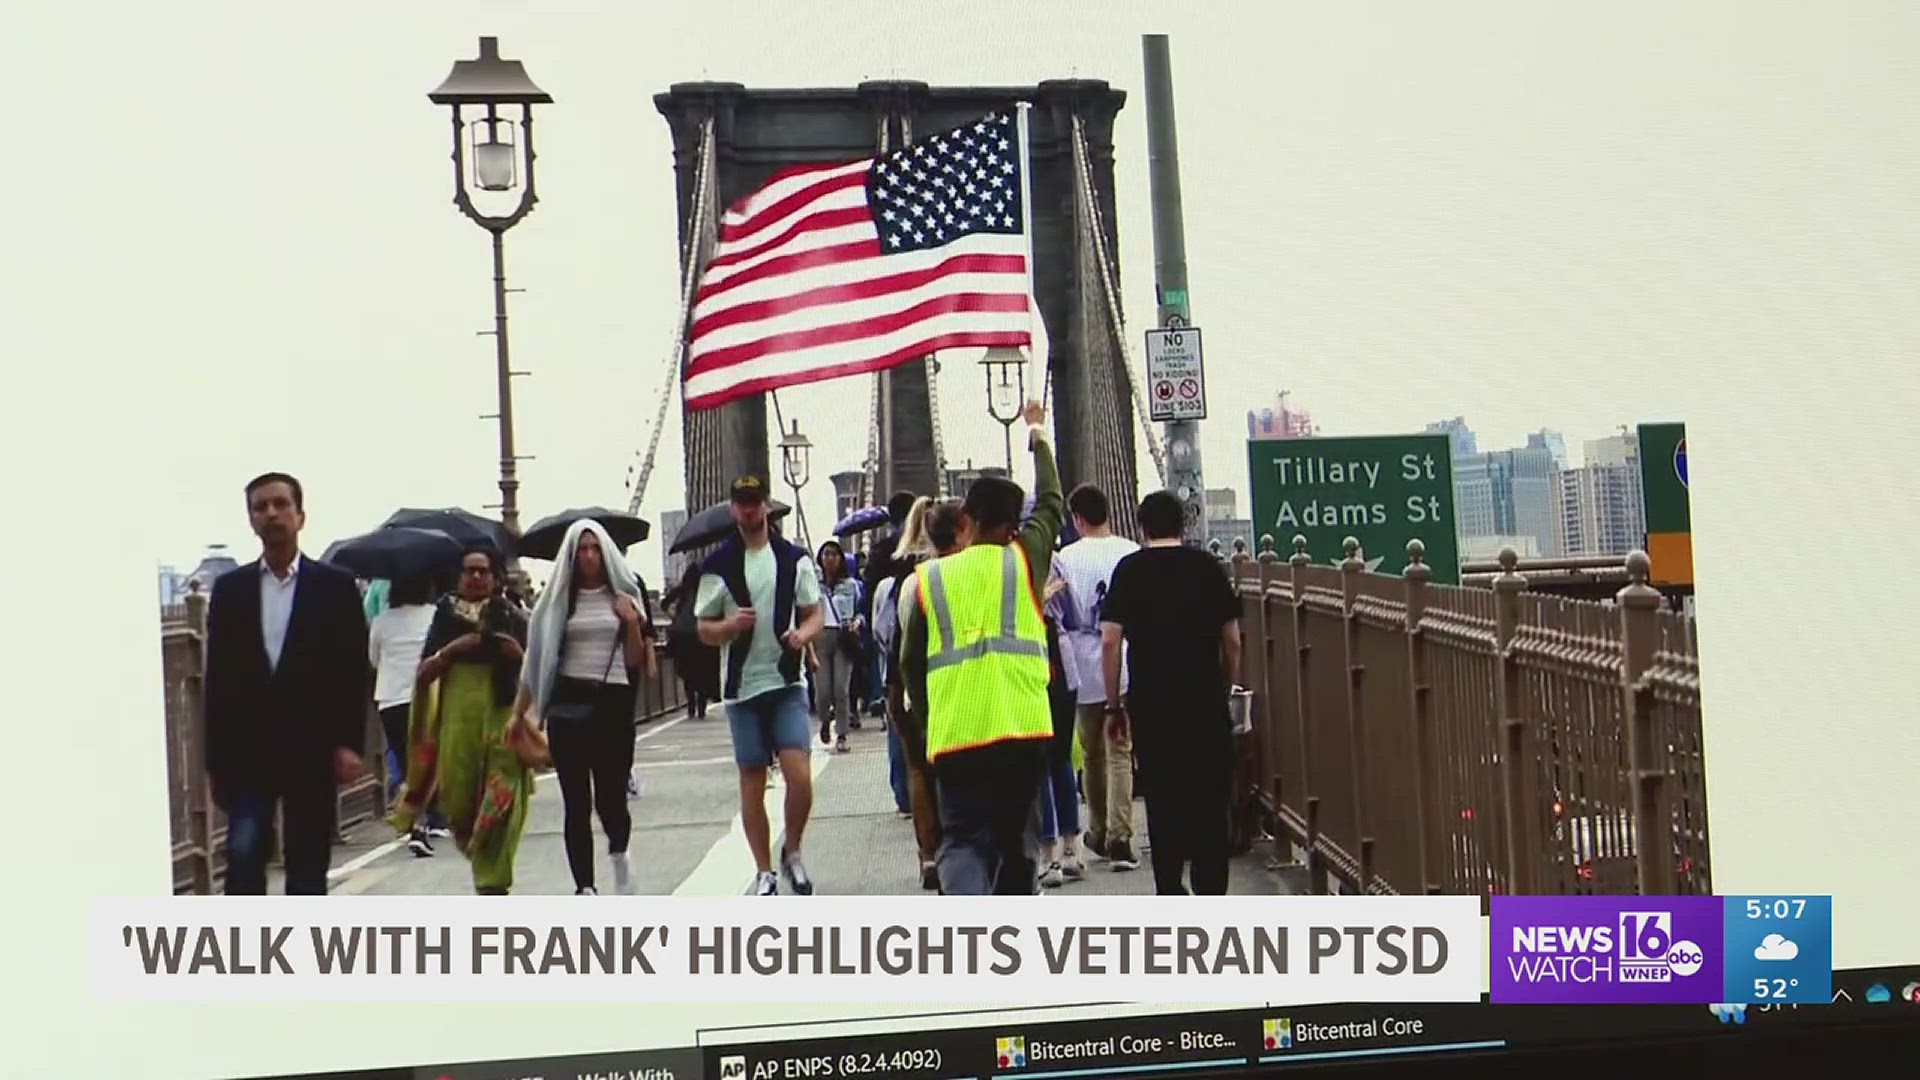 The documentary focuses on 70-year-old Vietnam War Veteran Frank Romeo and his mission to walk 750 miles across the state of New York to spread awareness for PTSD.